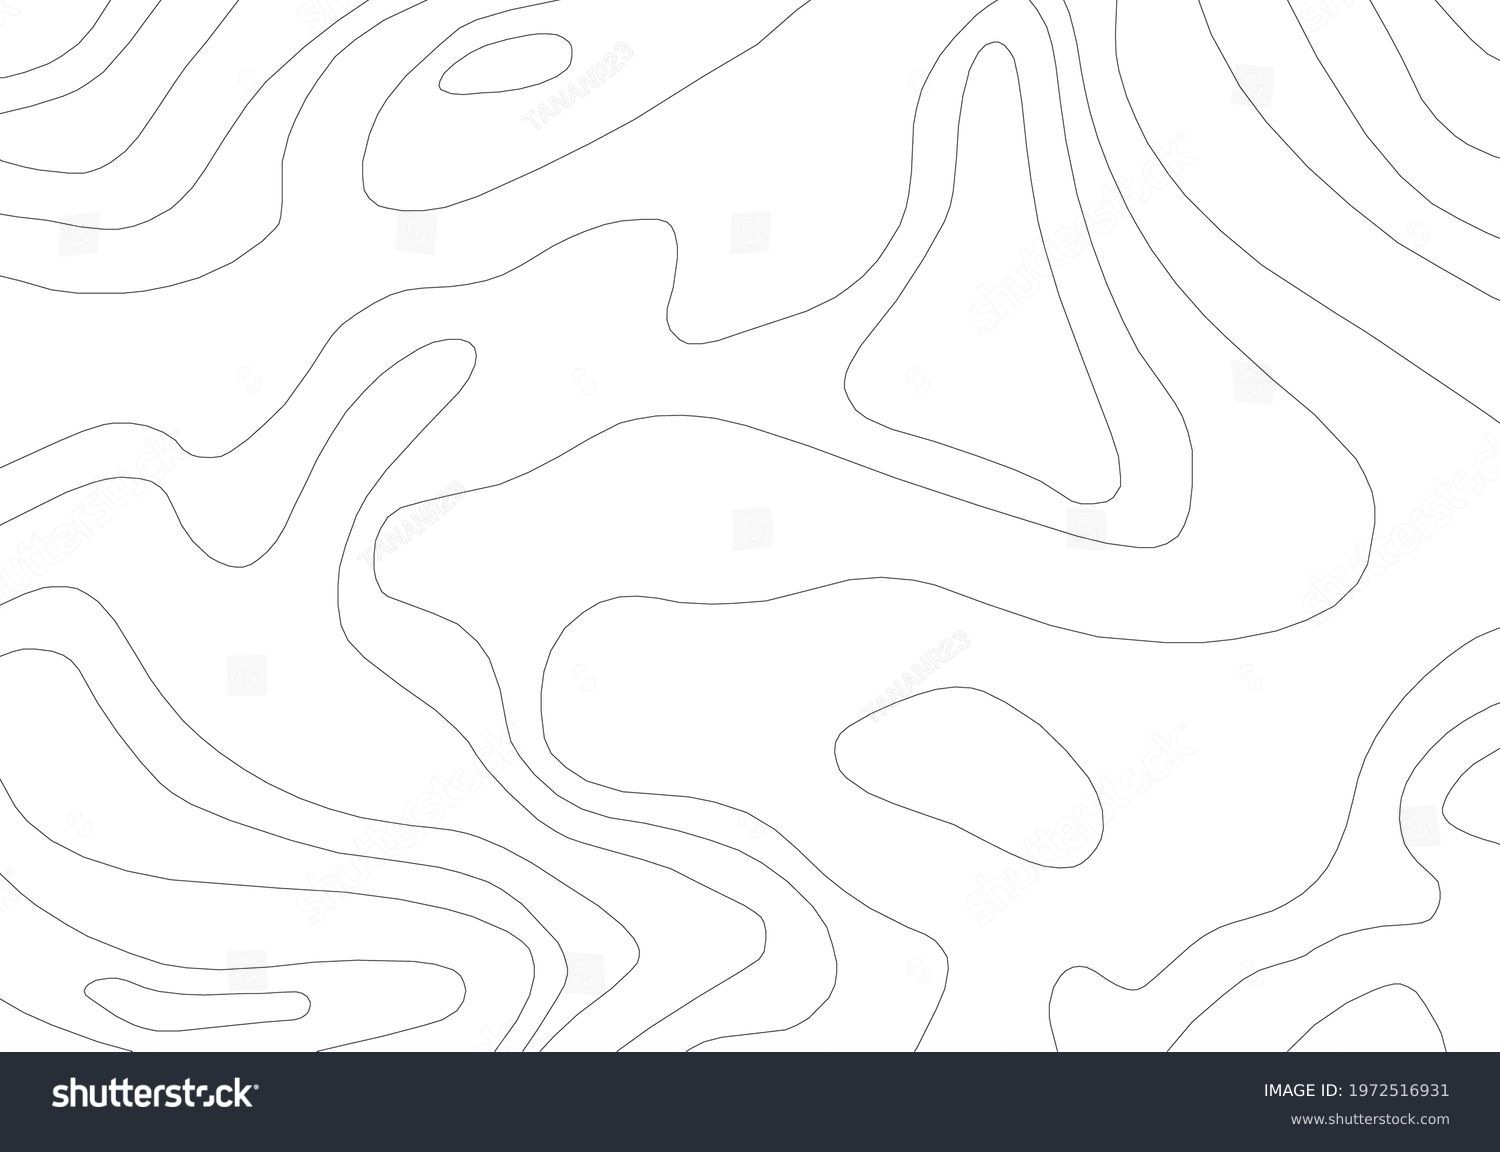 Abstract Contour Topographic Line Pattern in Black and Whiteのベクター画像素材